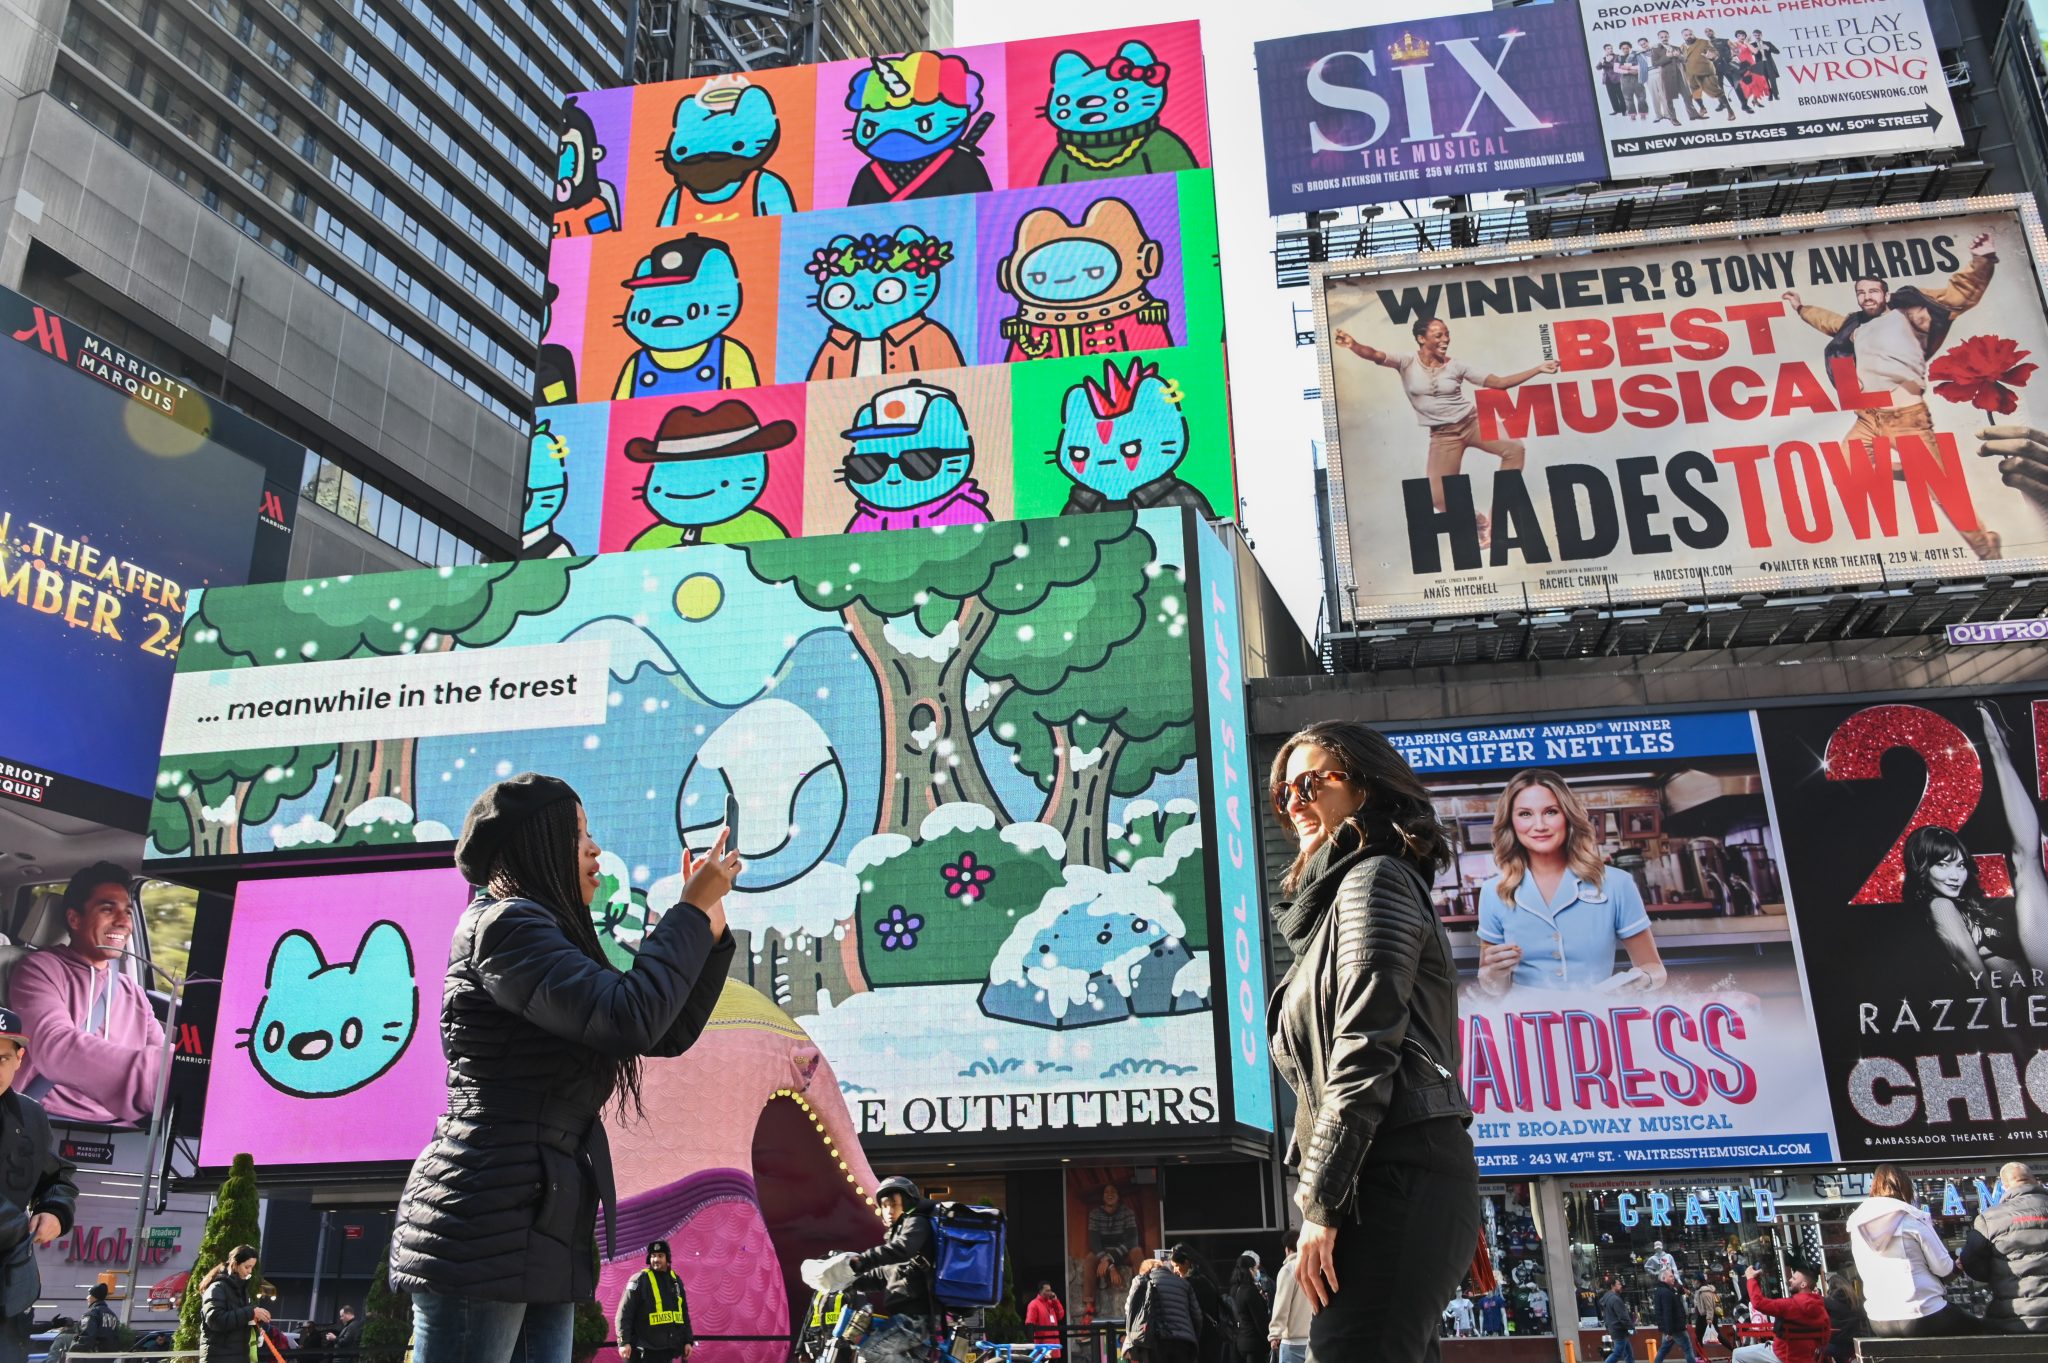 Cool Cats NFT billboards in Times Square on November 17, 2021 in New York City. Photo by Noam Galai/Getty Images.